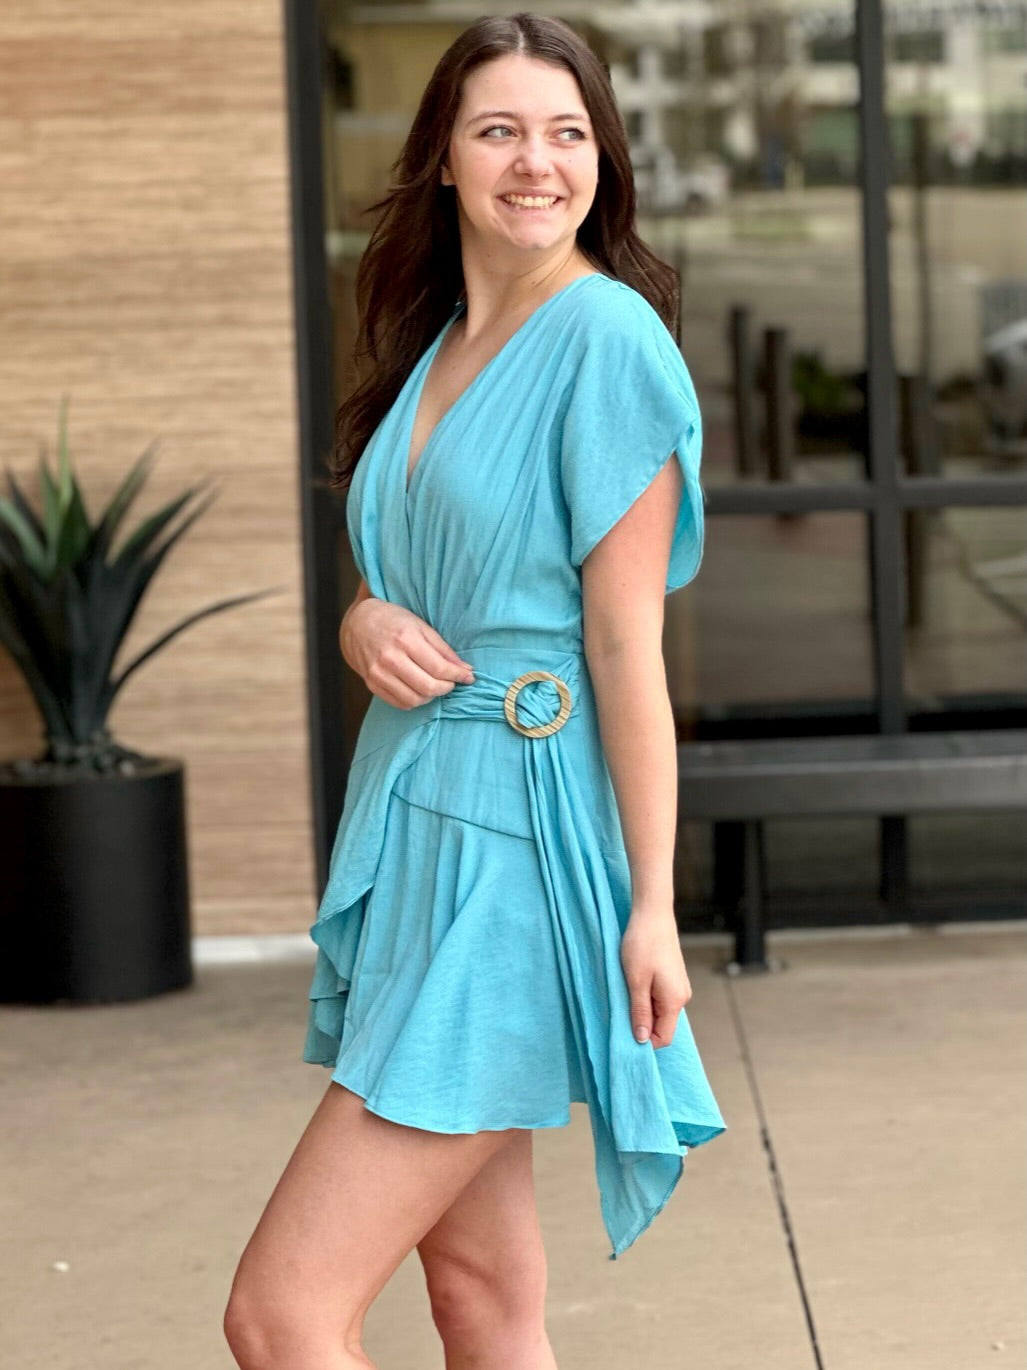 Megan in clear blue romper side view looking to the side smiling